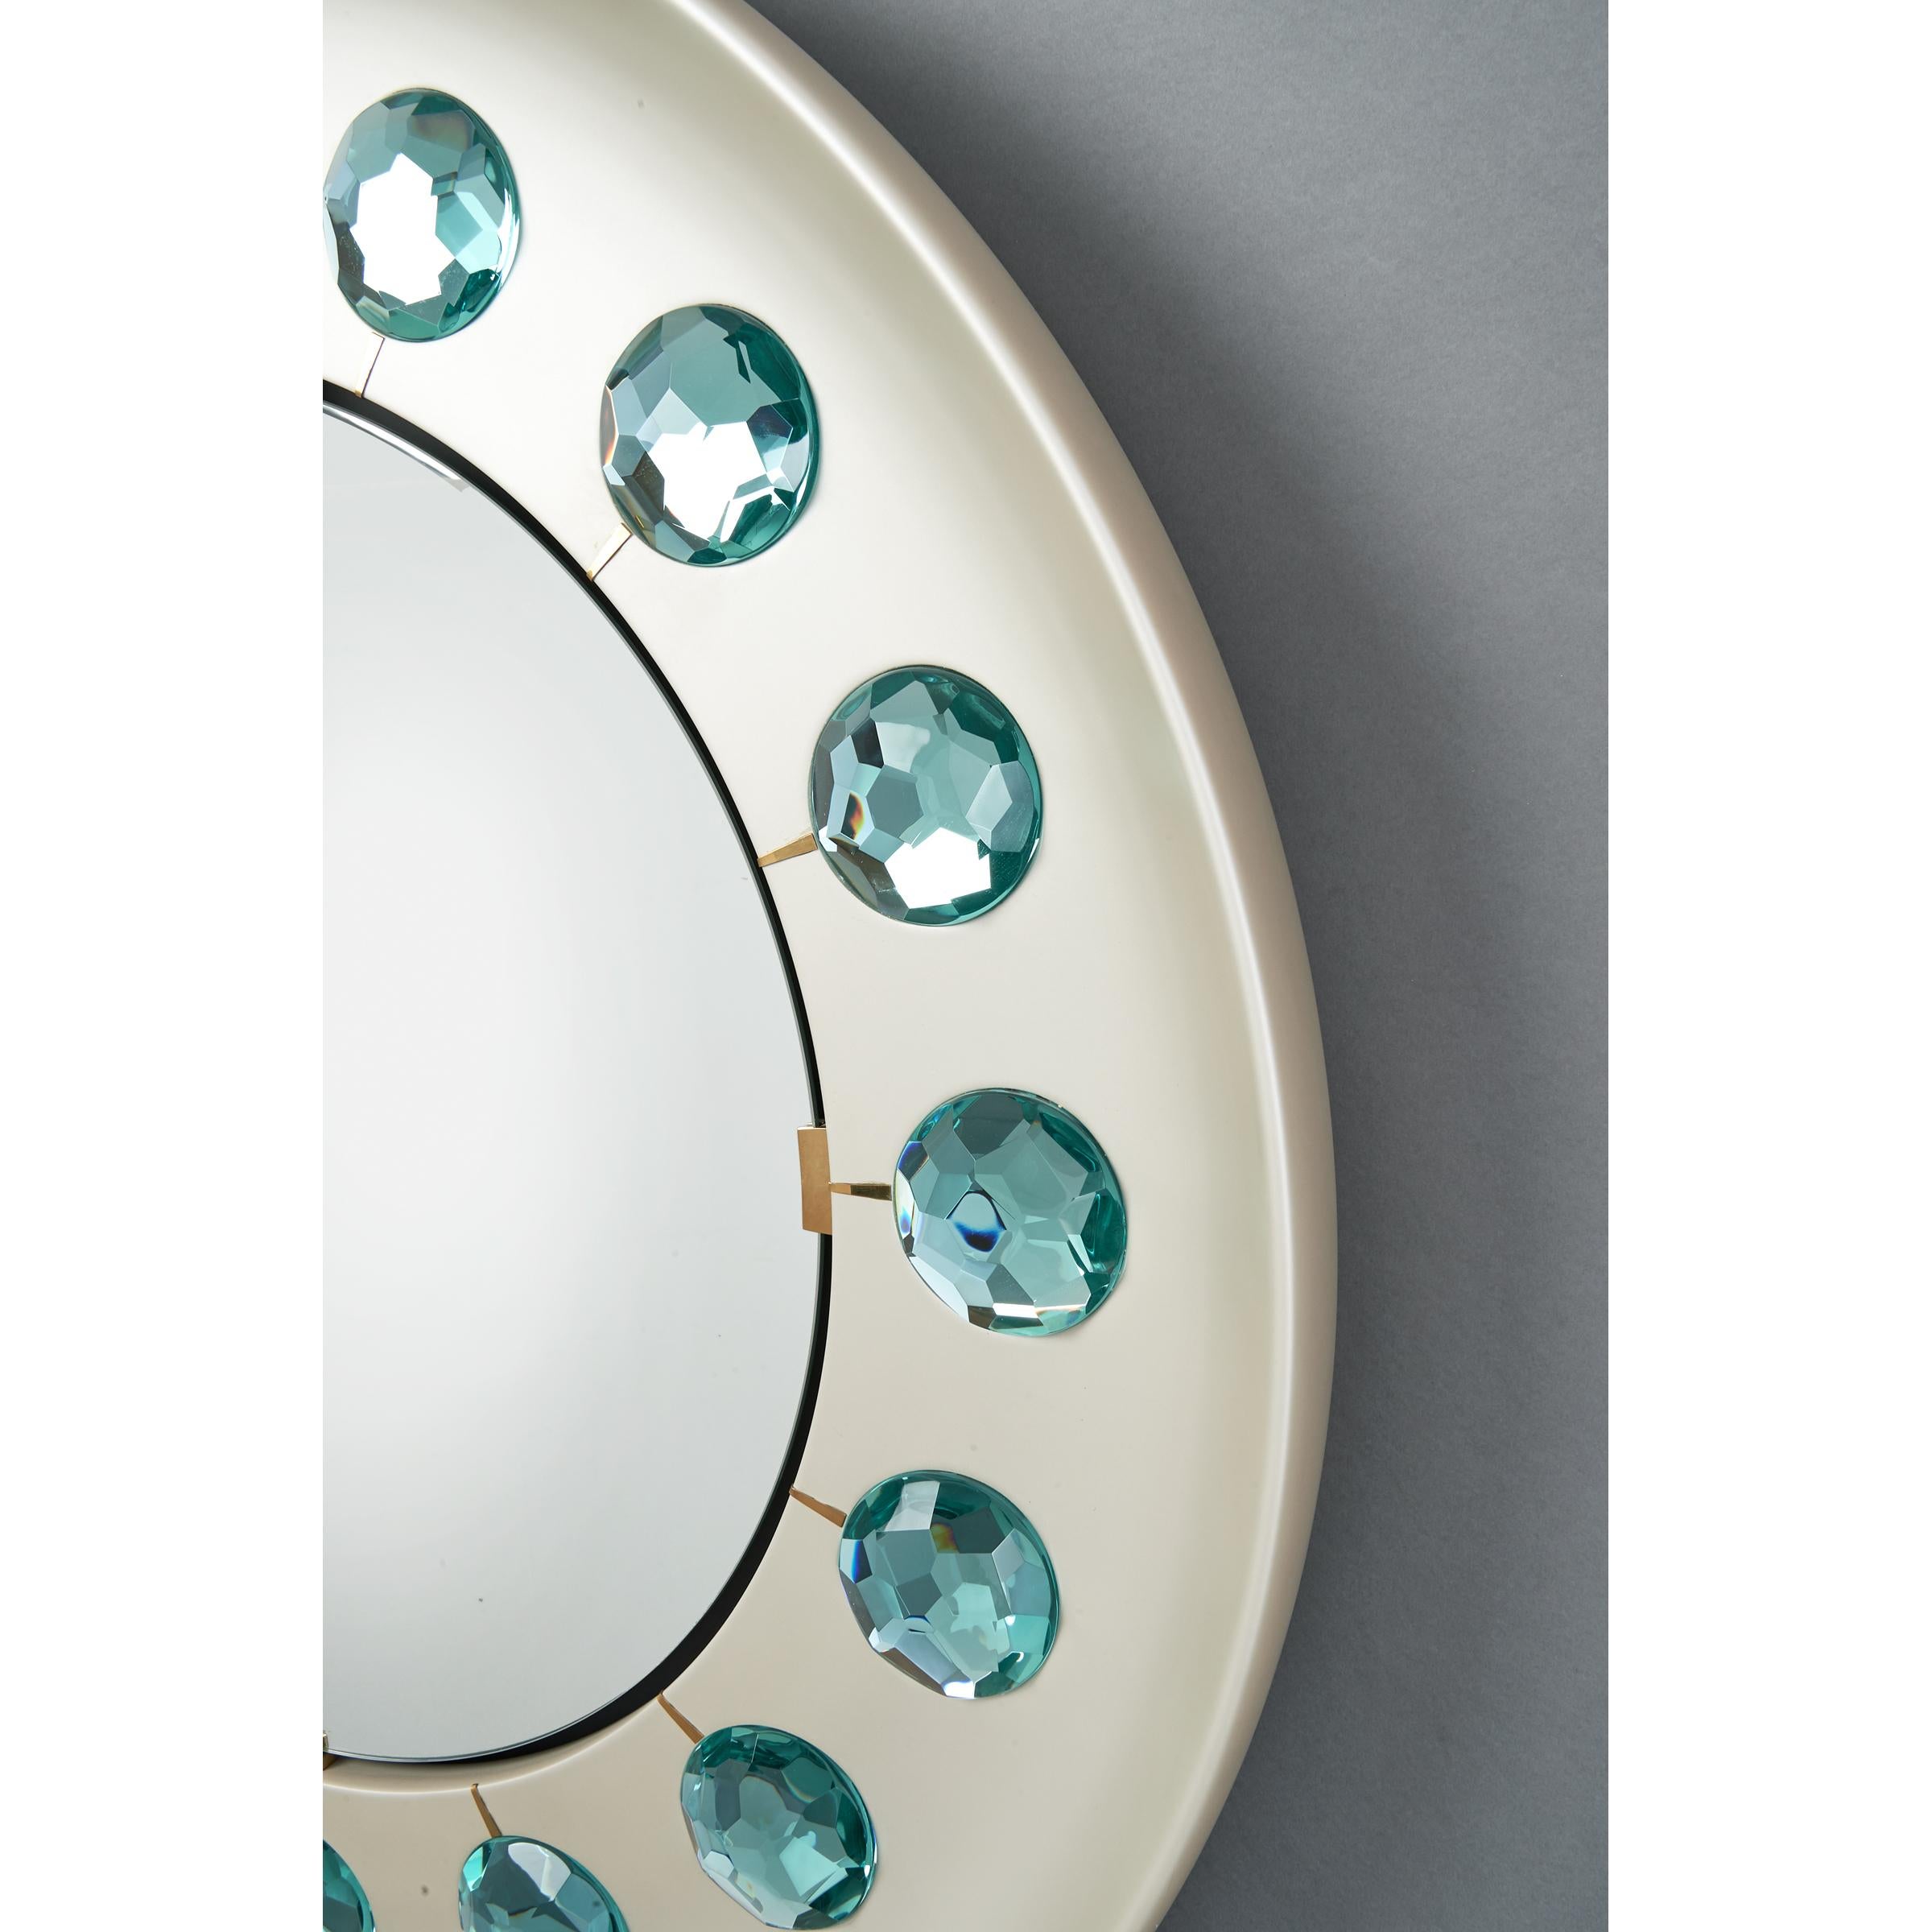 Enameled Ghiro Studio Mirror with Faceted Diamond Cut Glass, Italy, 2019